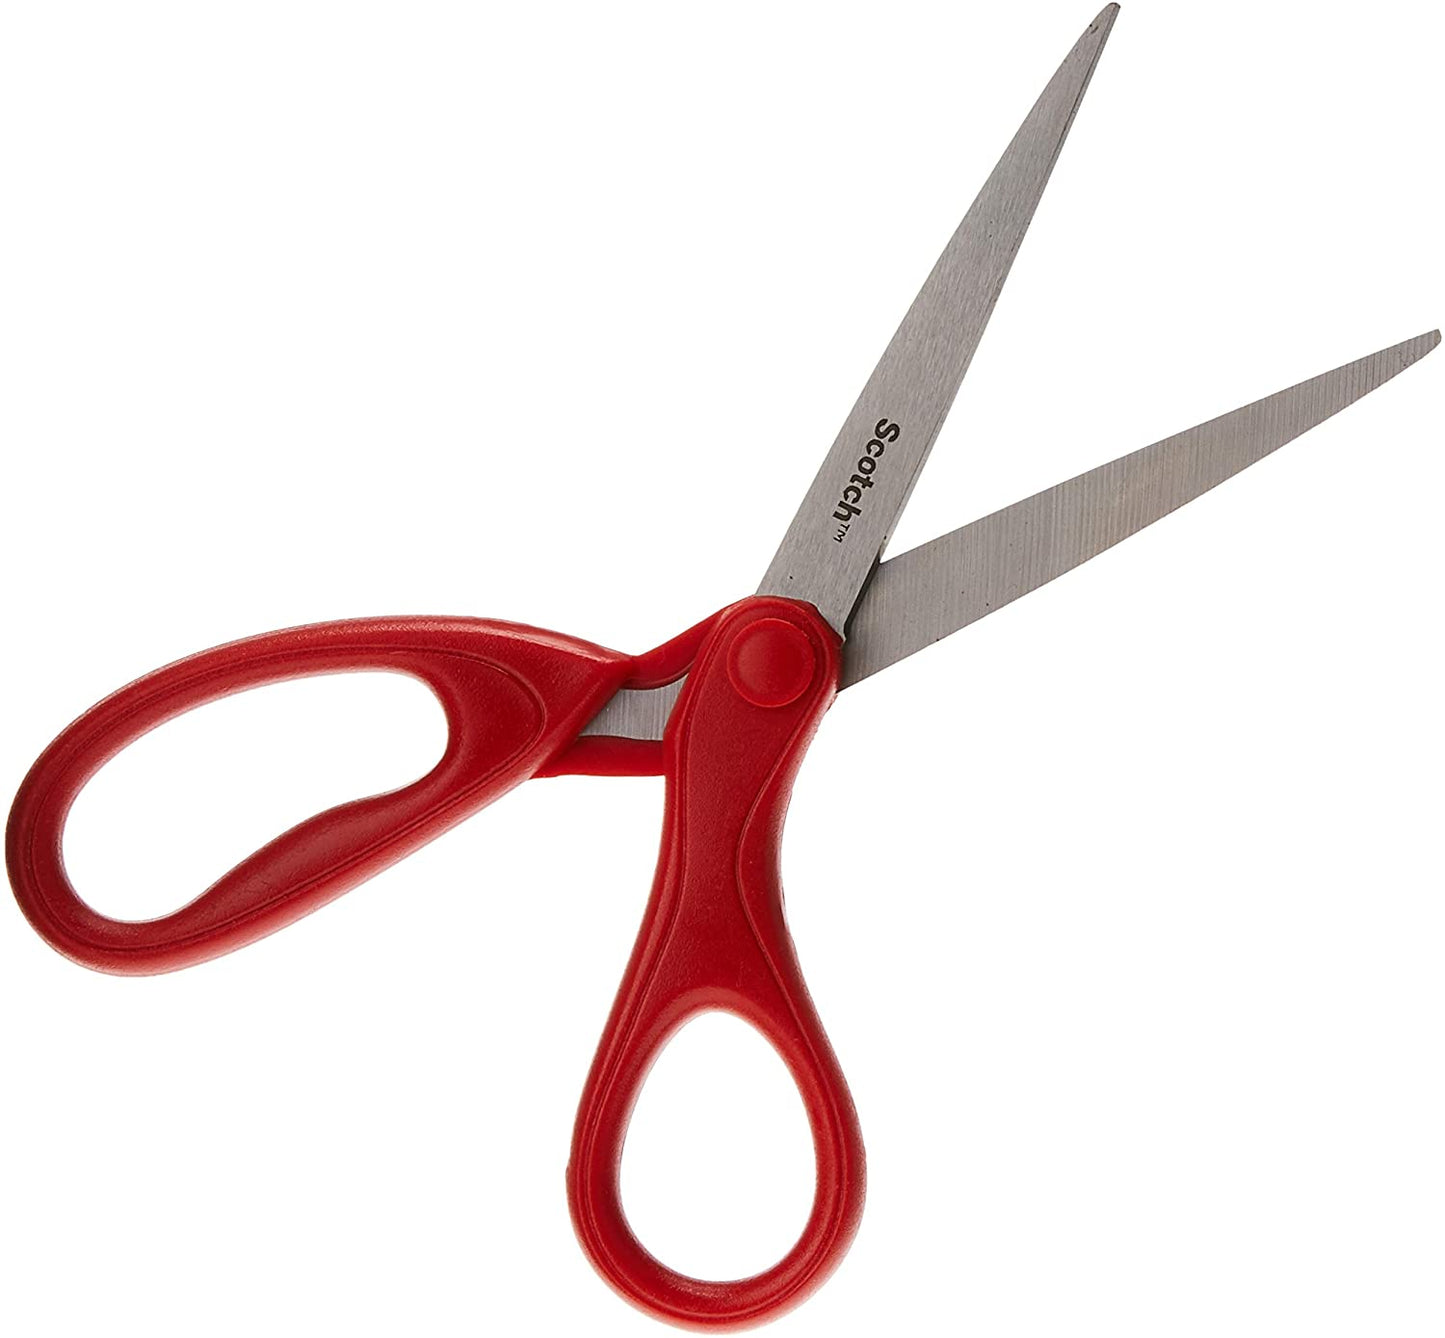 Scotch Household Scissor, 7-Inches Red Handle Light Duty Cutting Stainless Steel Blades